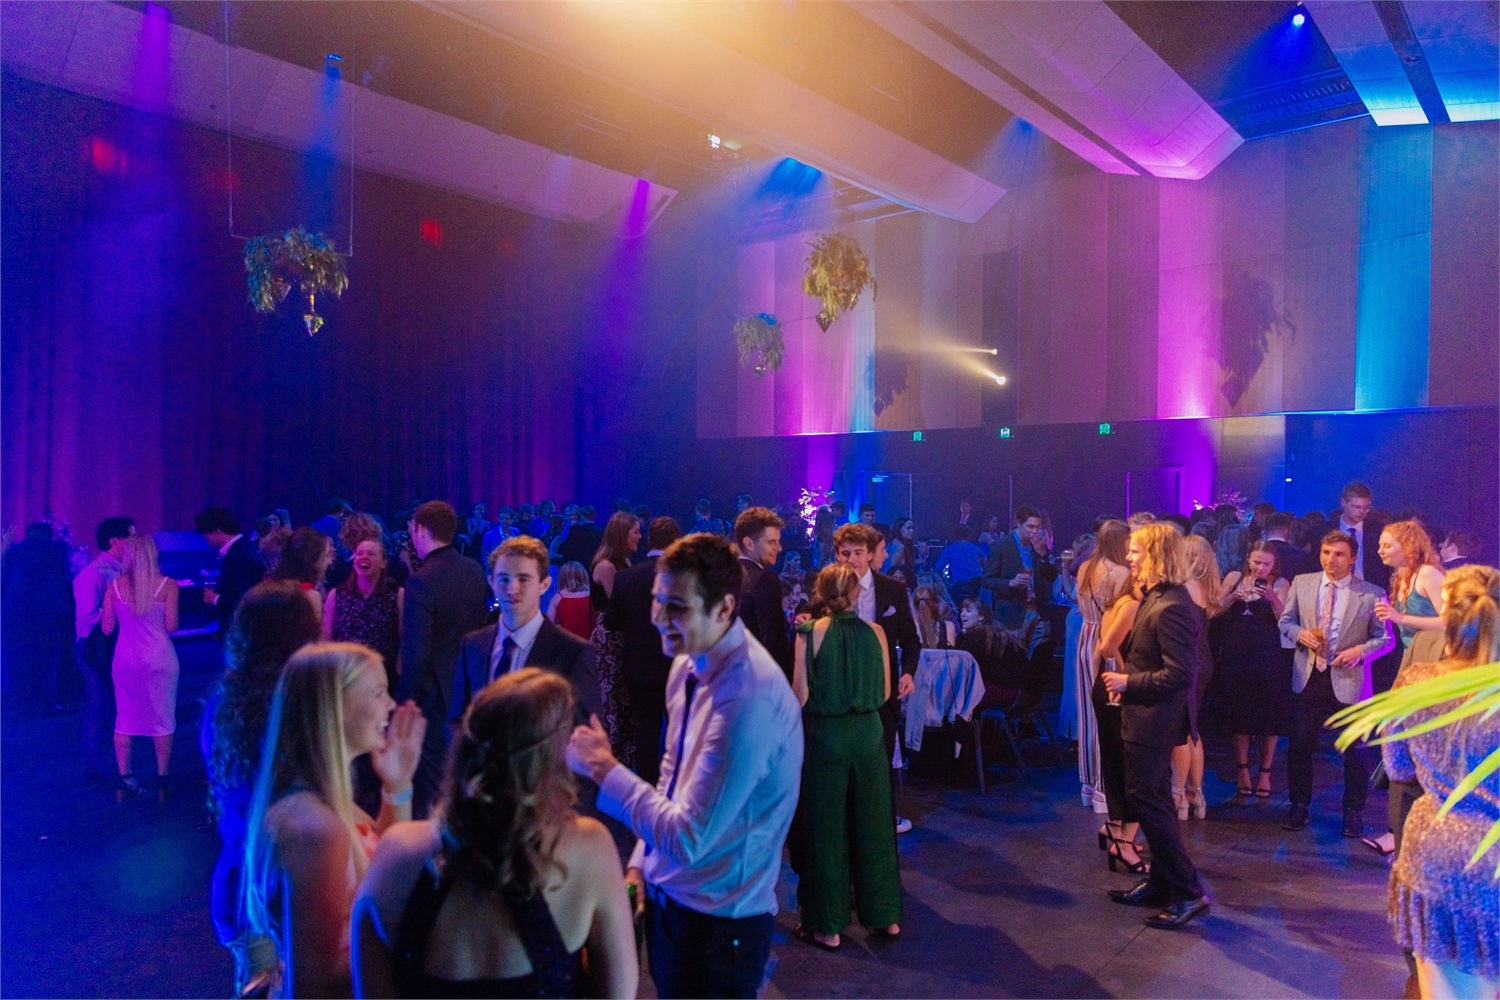 Graduating in August? Celebrate in style at our annual Grad Ball! Held in Haere-roa, it's a night to remember. Arrive to a red carpet entrance, with champagne on arrival; then continue into the night with canapés, cocktails, and live music. Make sure your grab a ticket and show up in your Sunday best.